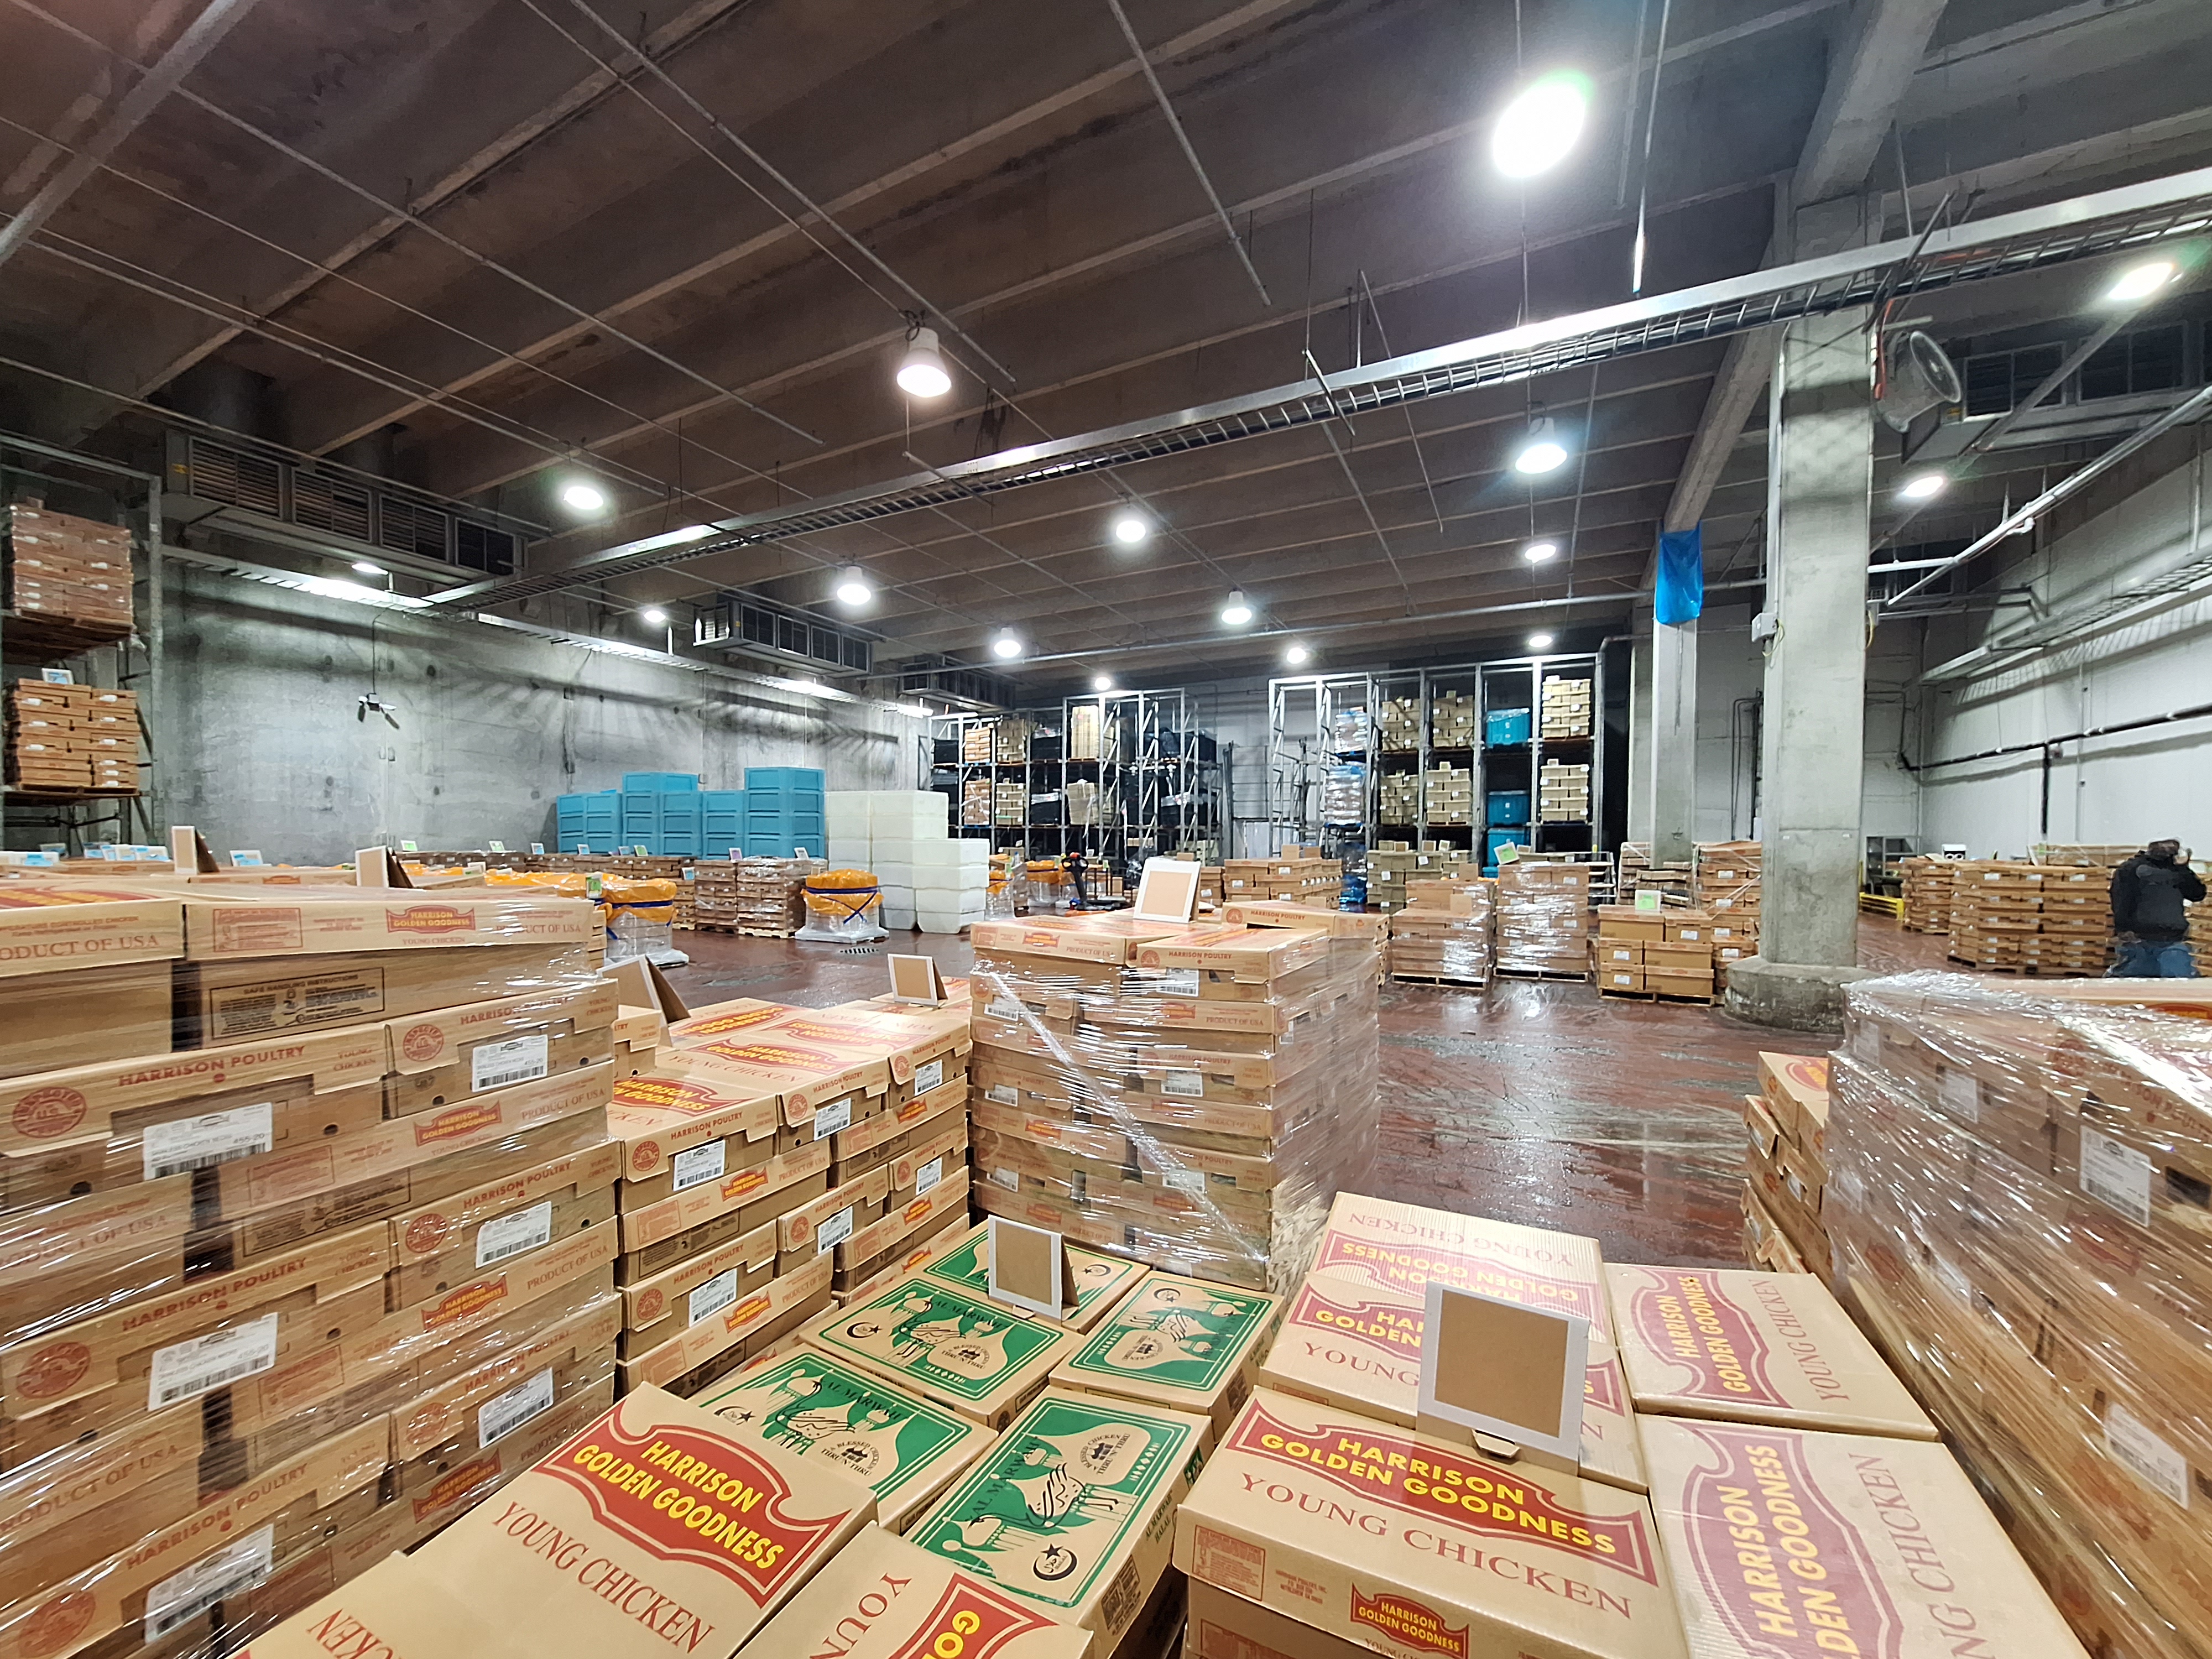 Image of cardboard boxes of chicken for export, stacked in a warehouse. Photo by Martin Aucoin